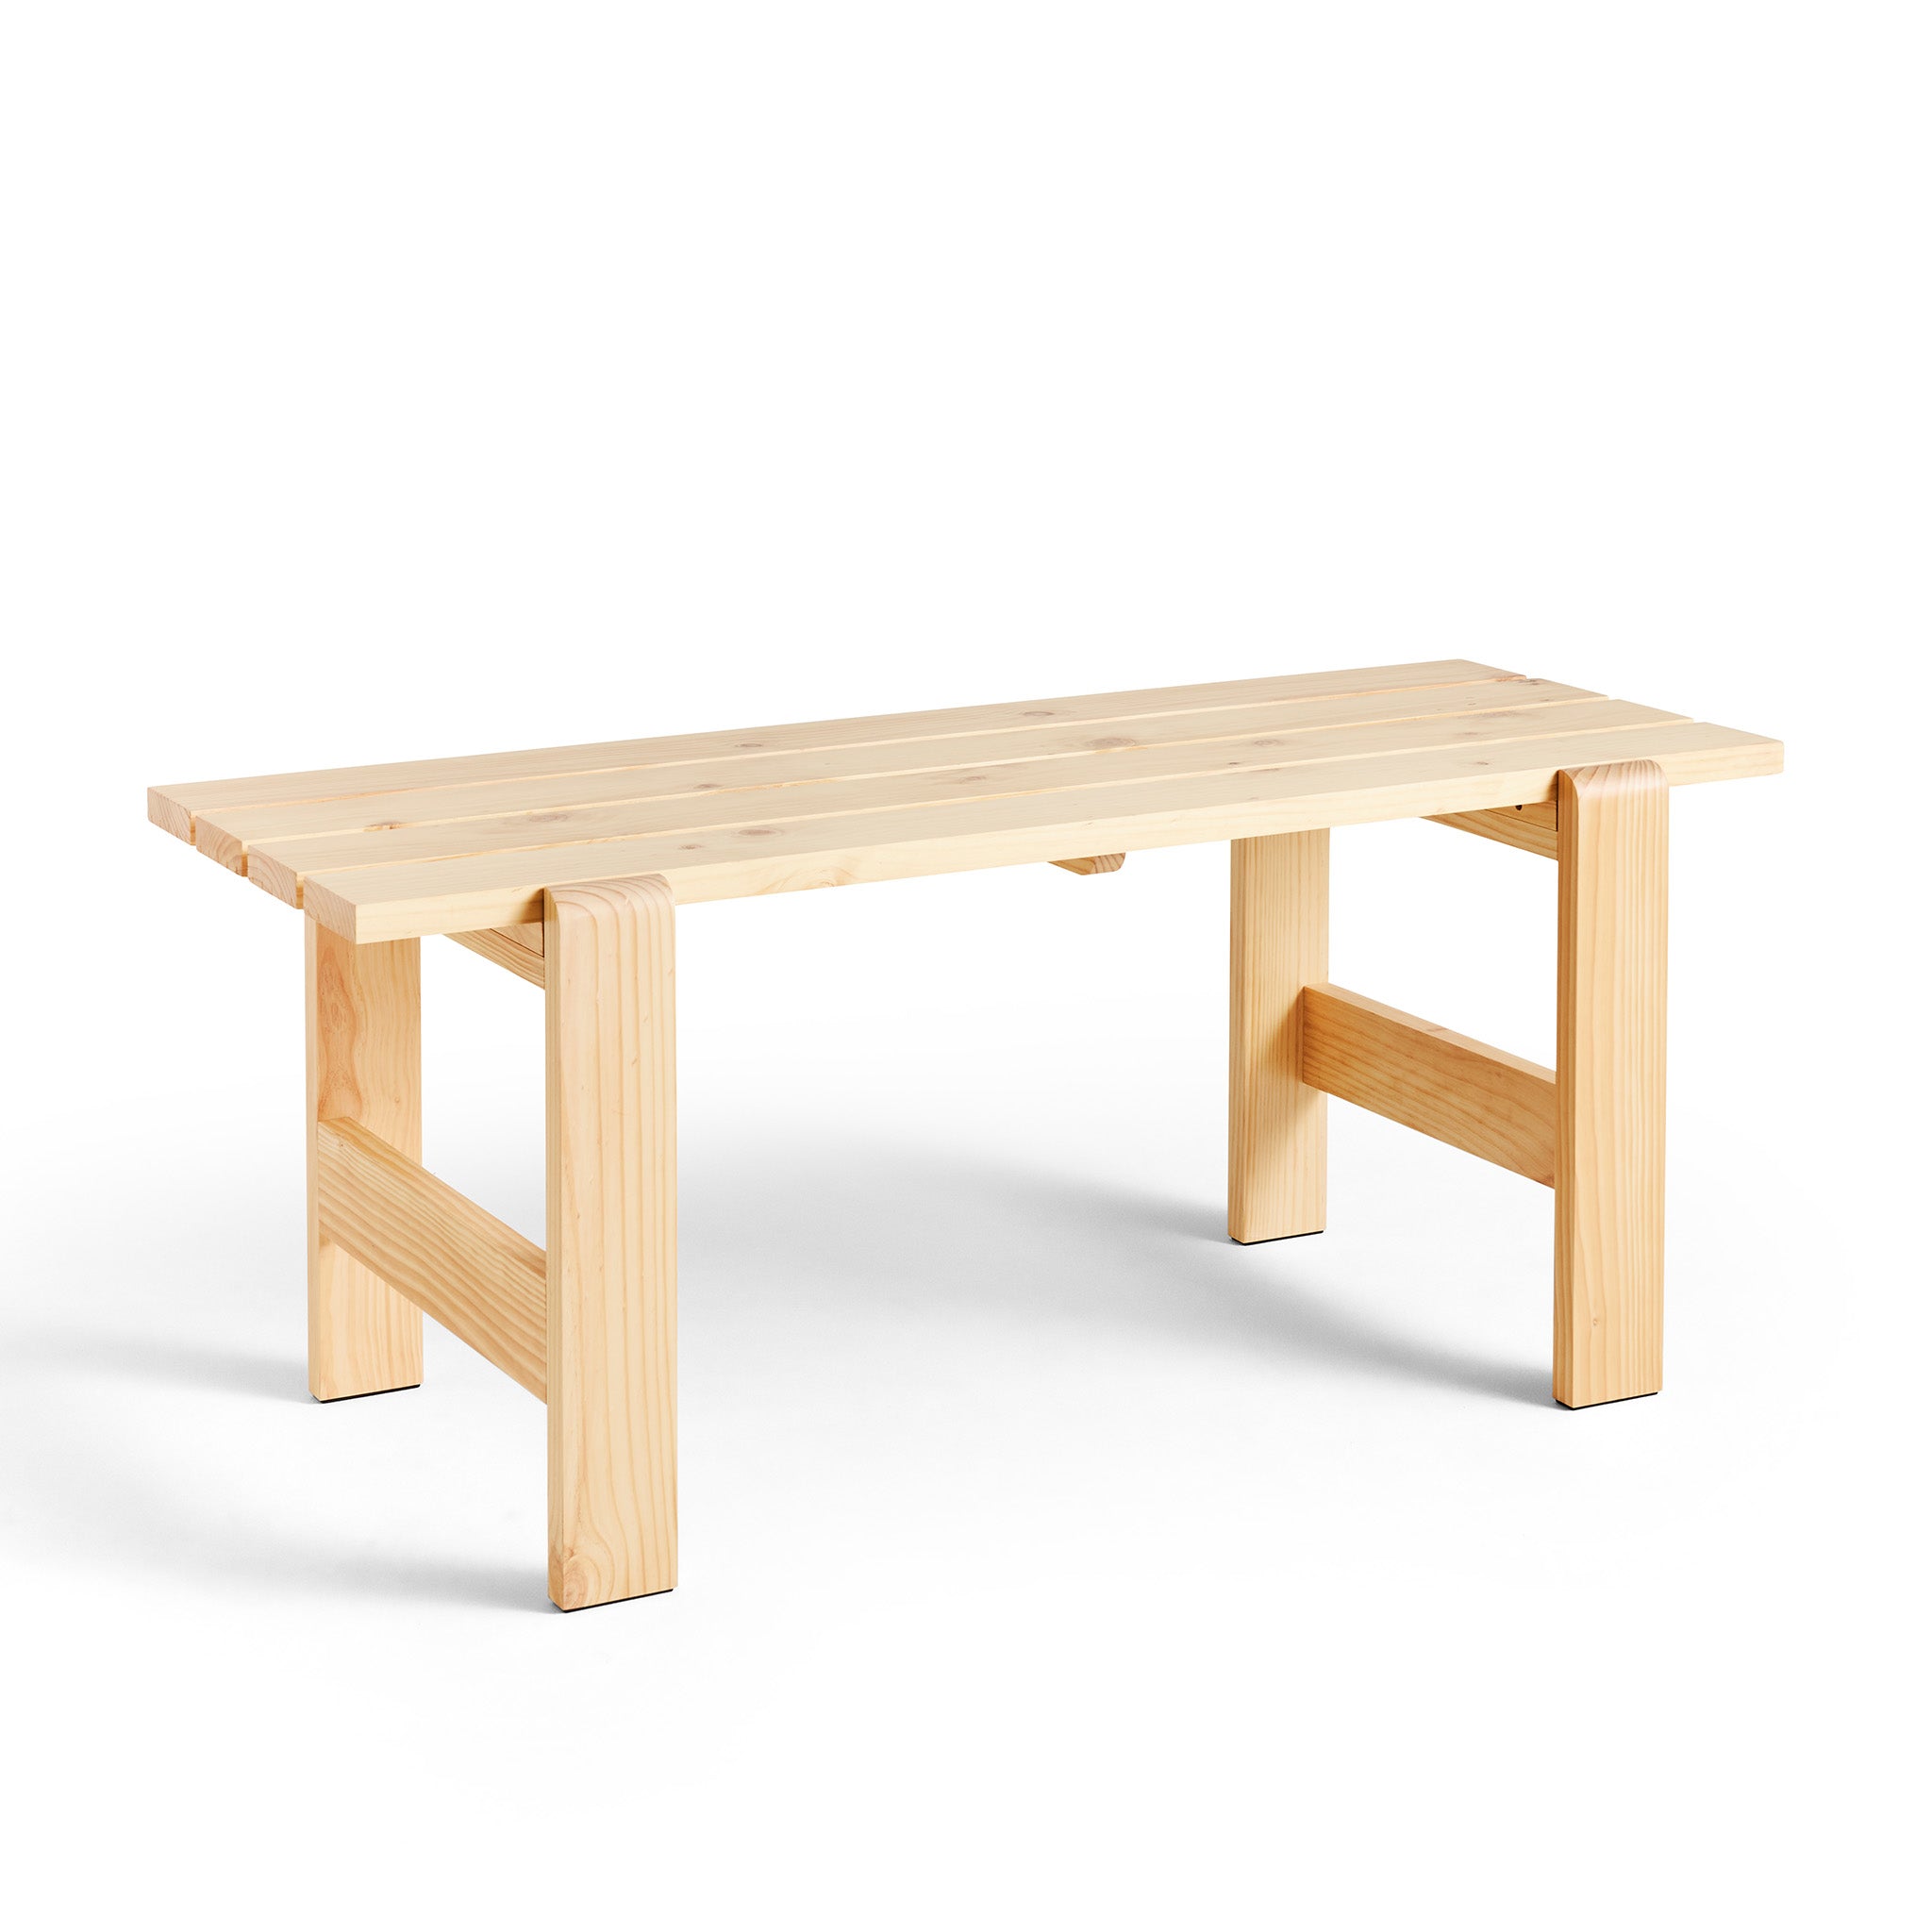 Weekday Table by Hannes & Fritz for Hay